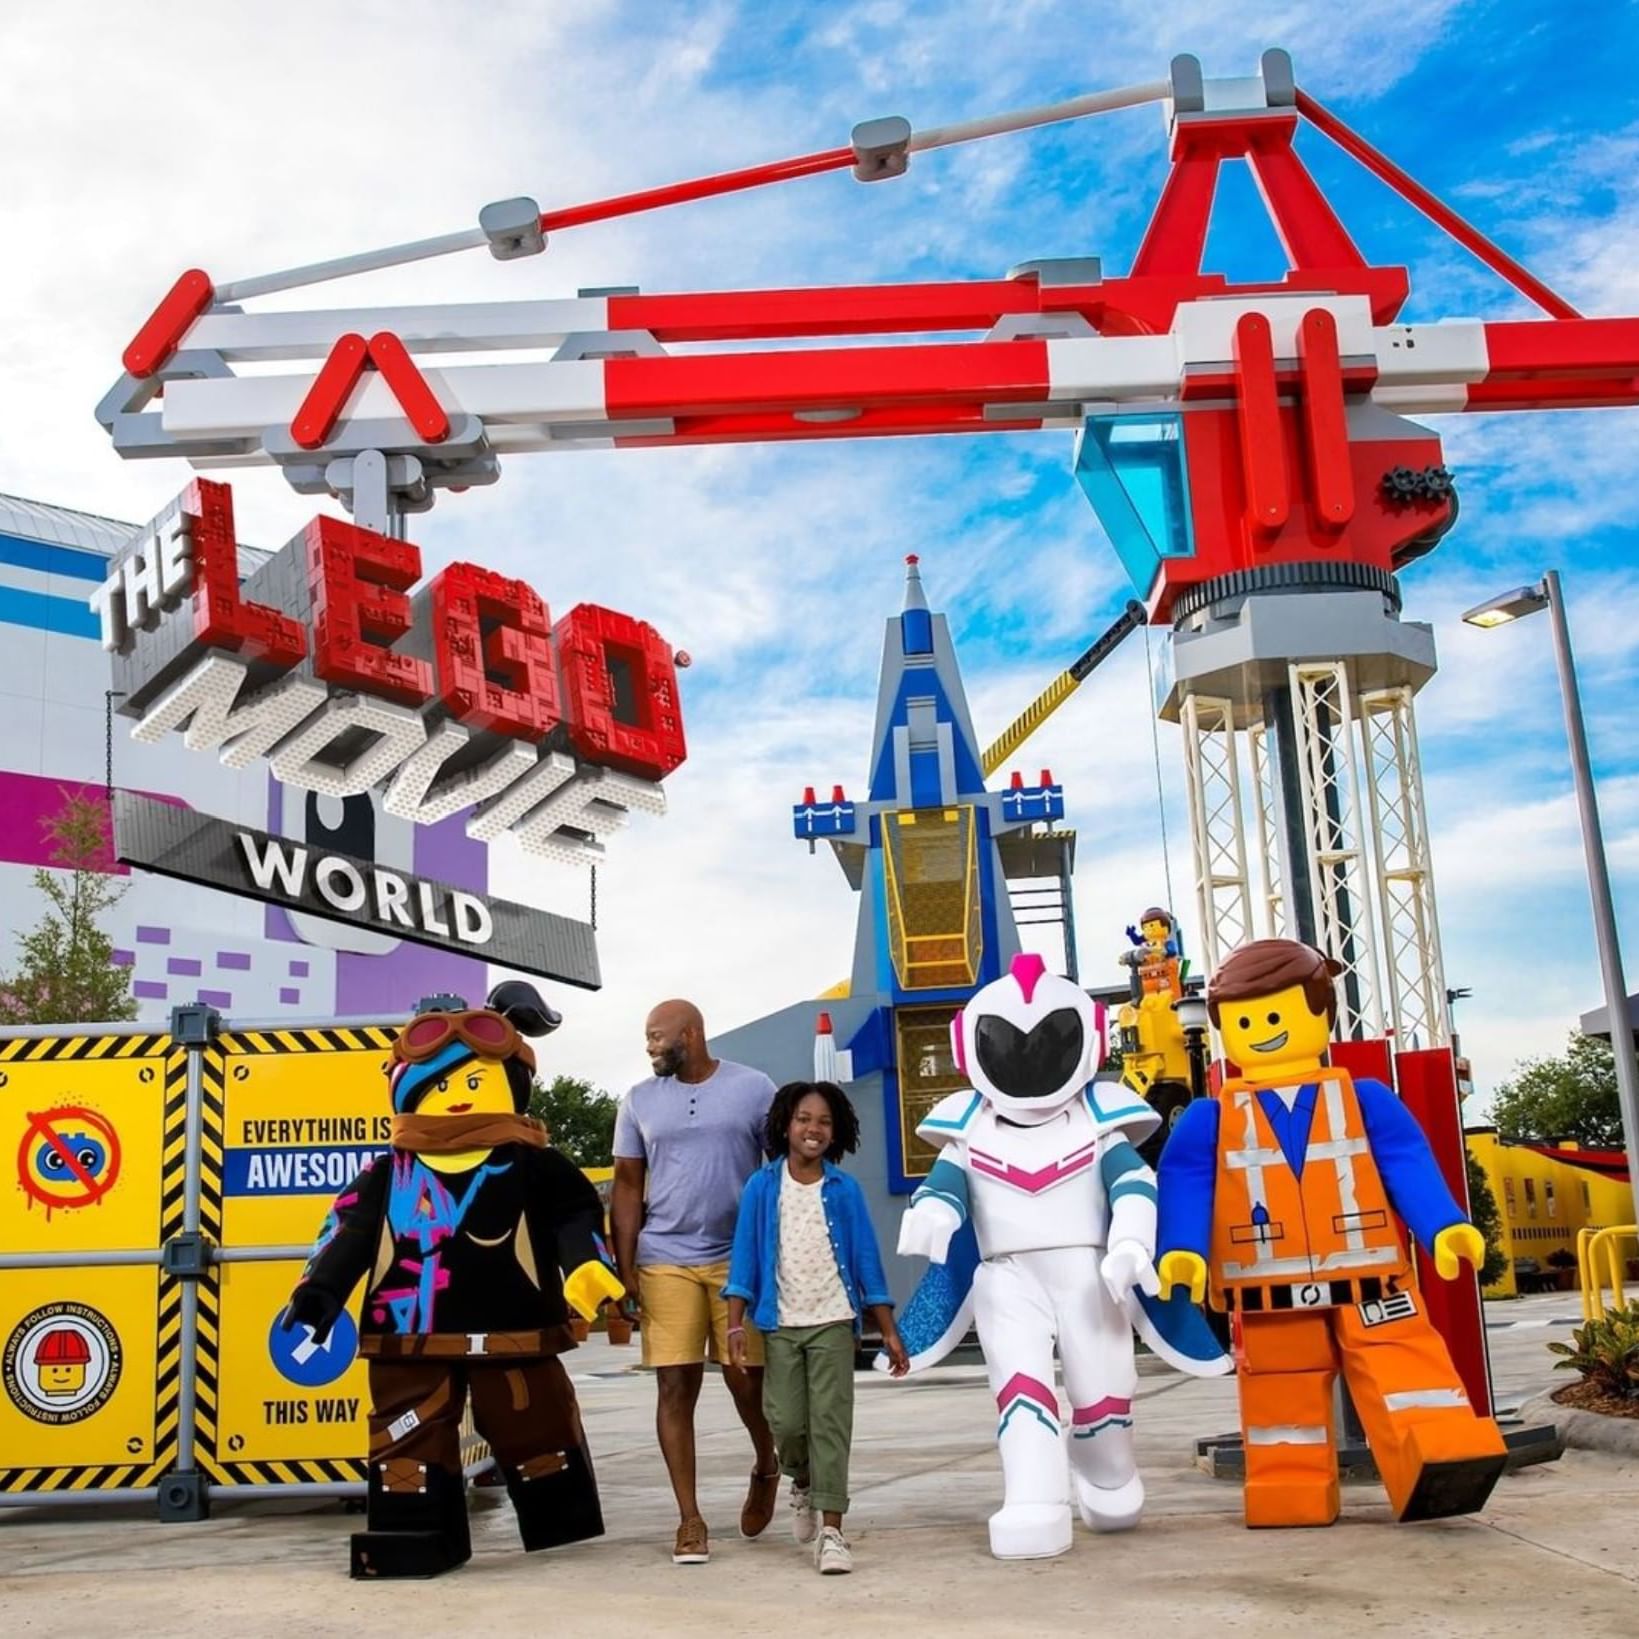 LEGO MOVIE World Now Open in Carlsbad, CA | Carlsbad by the Sea Hotel